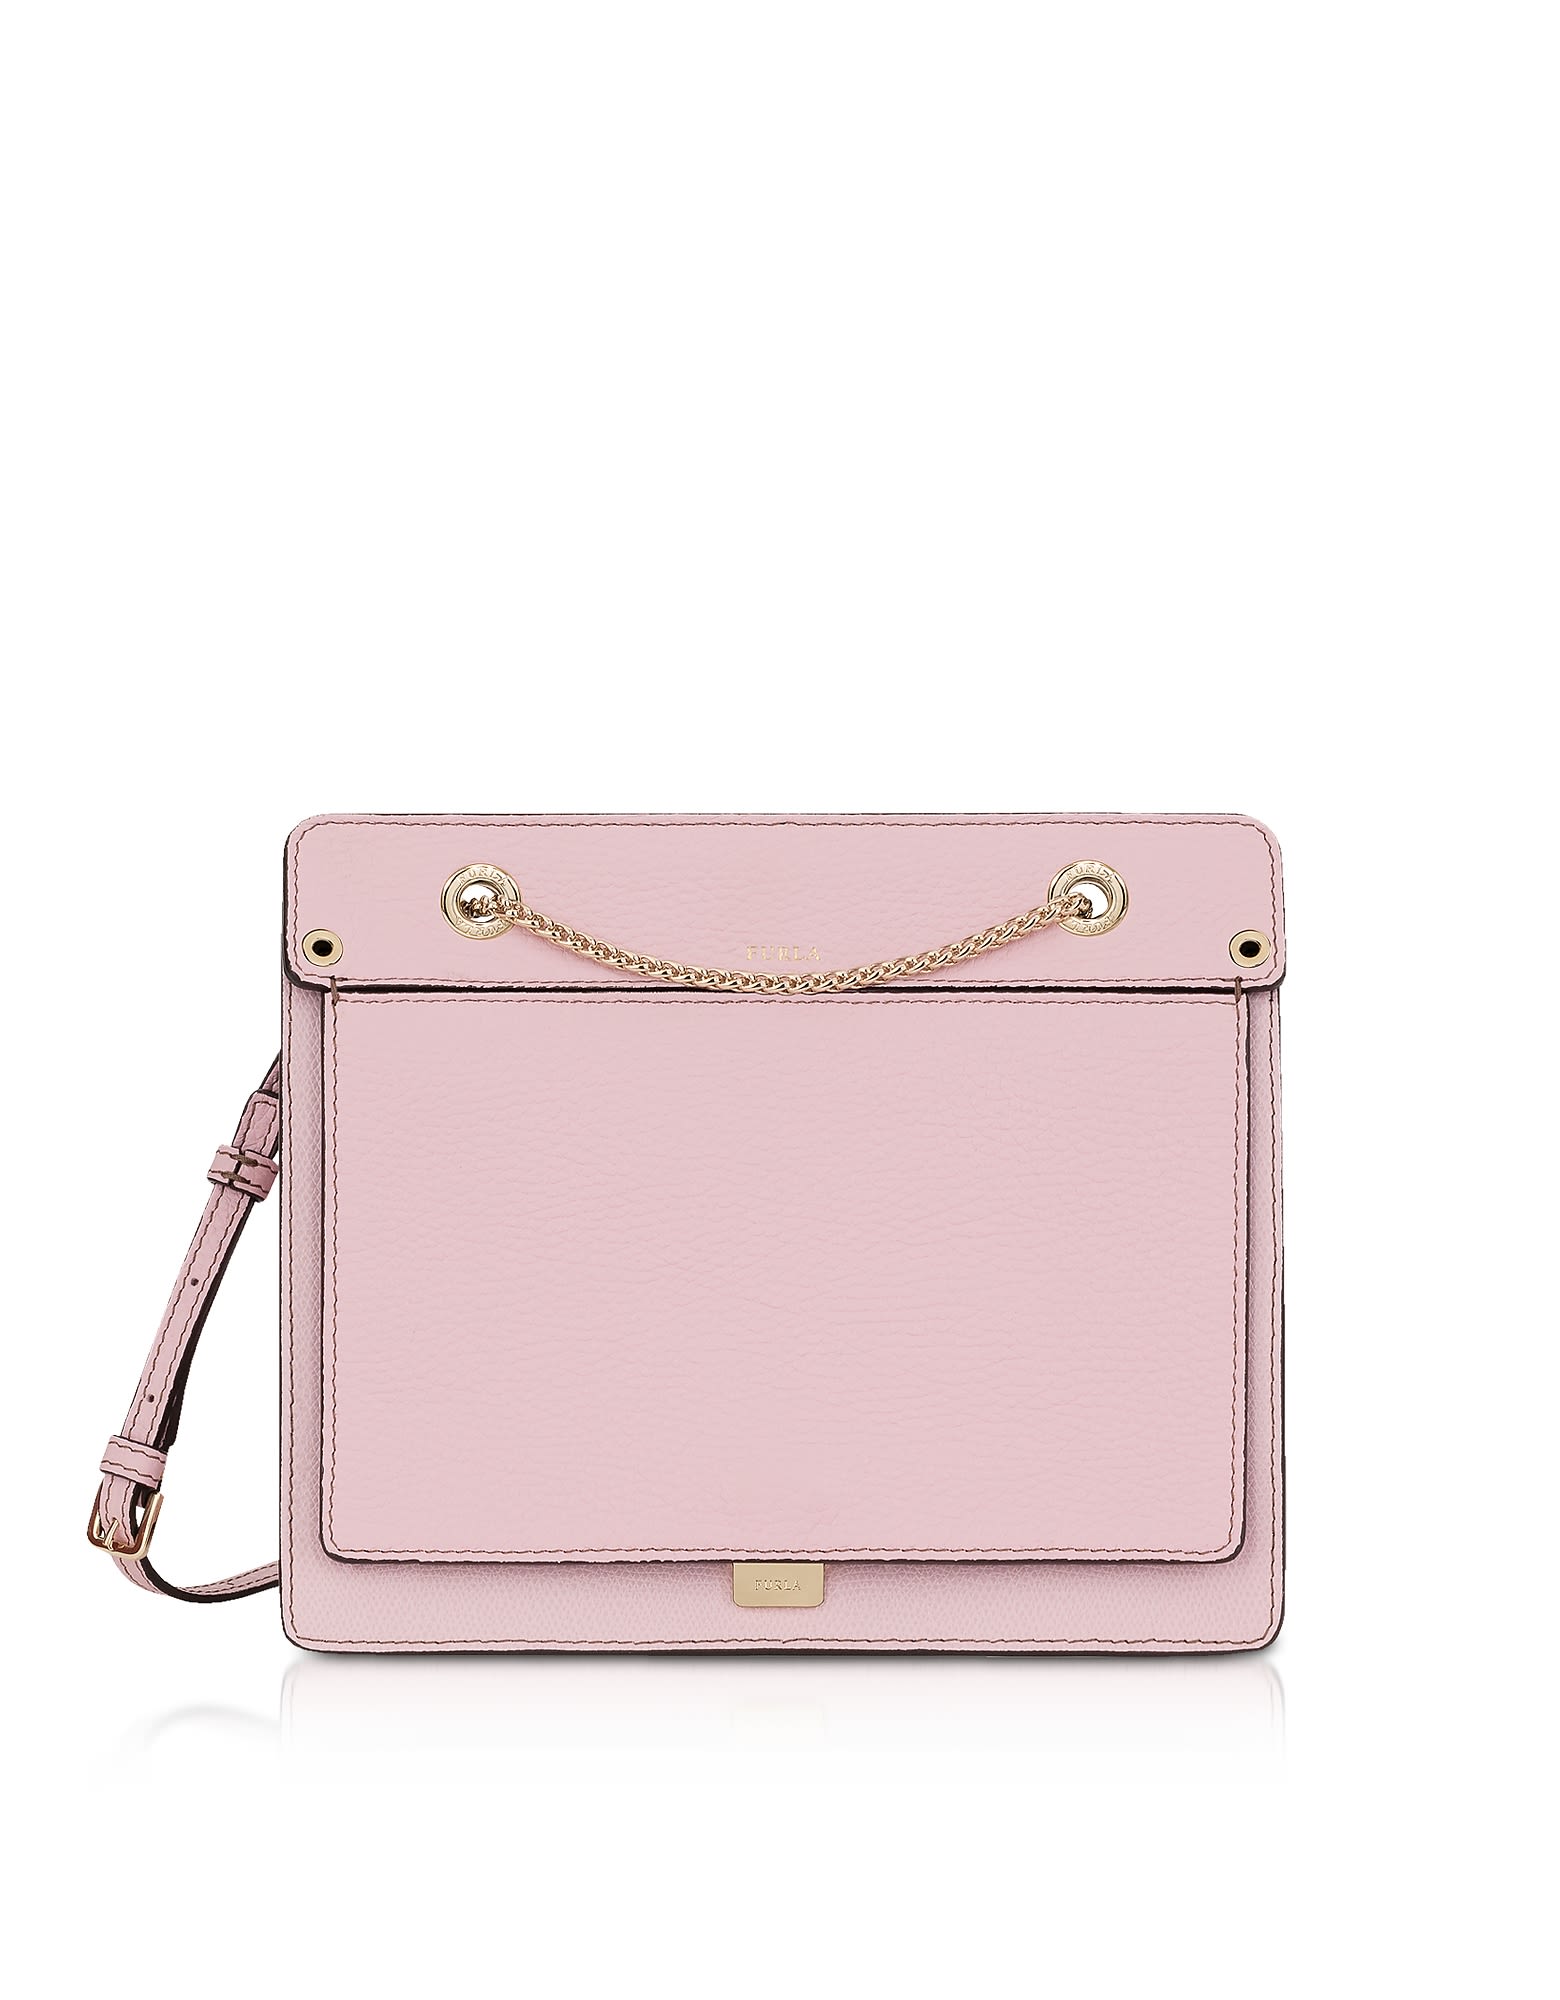 italist | Best price in the market for Furla Furla Like Small Leather Crossbody Bag W/chain ...